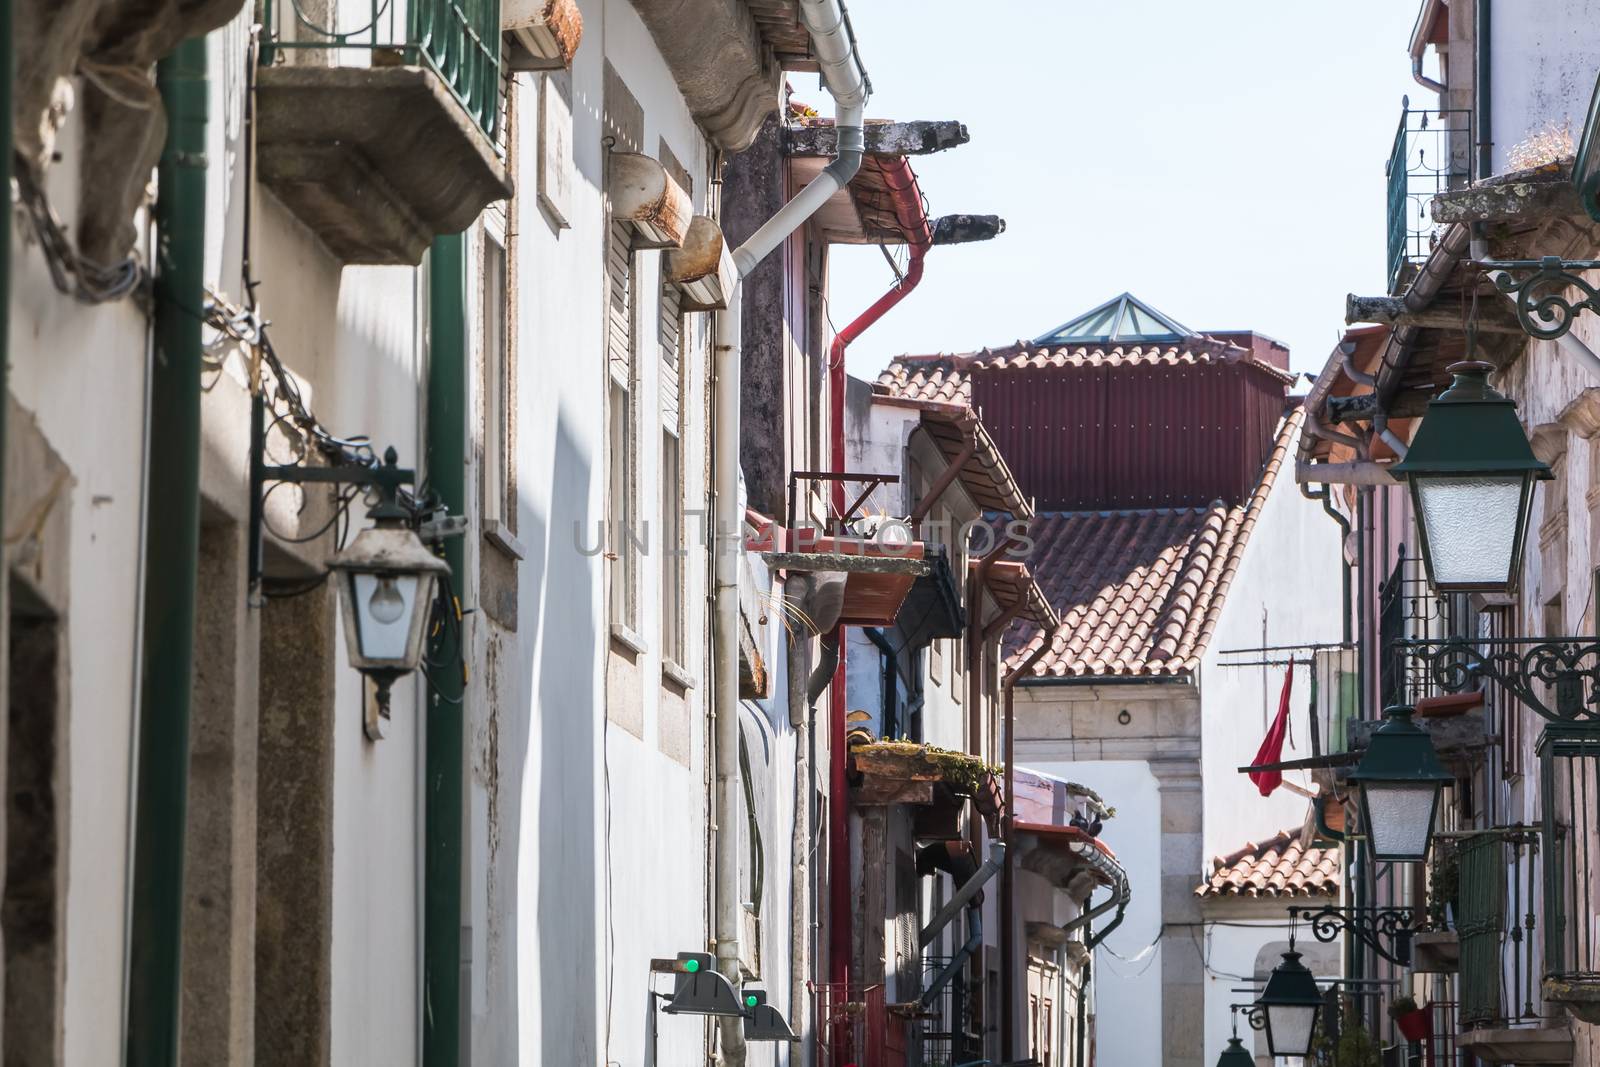 Architecture detail of typical houses and shops in viana do cast by AtlanticEUROSTOXX